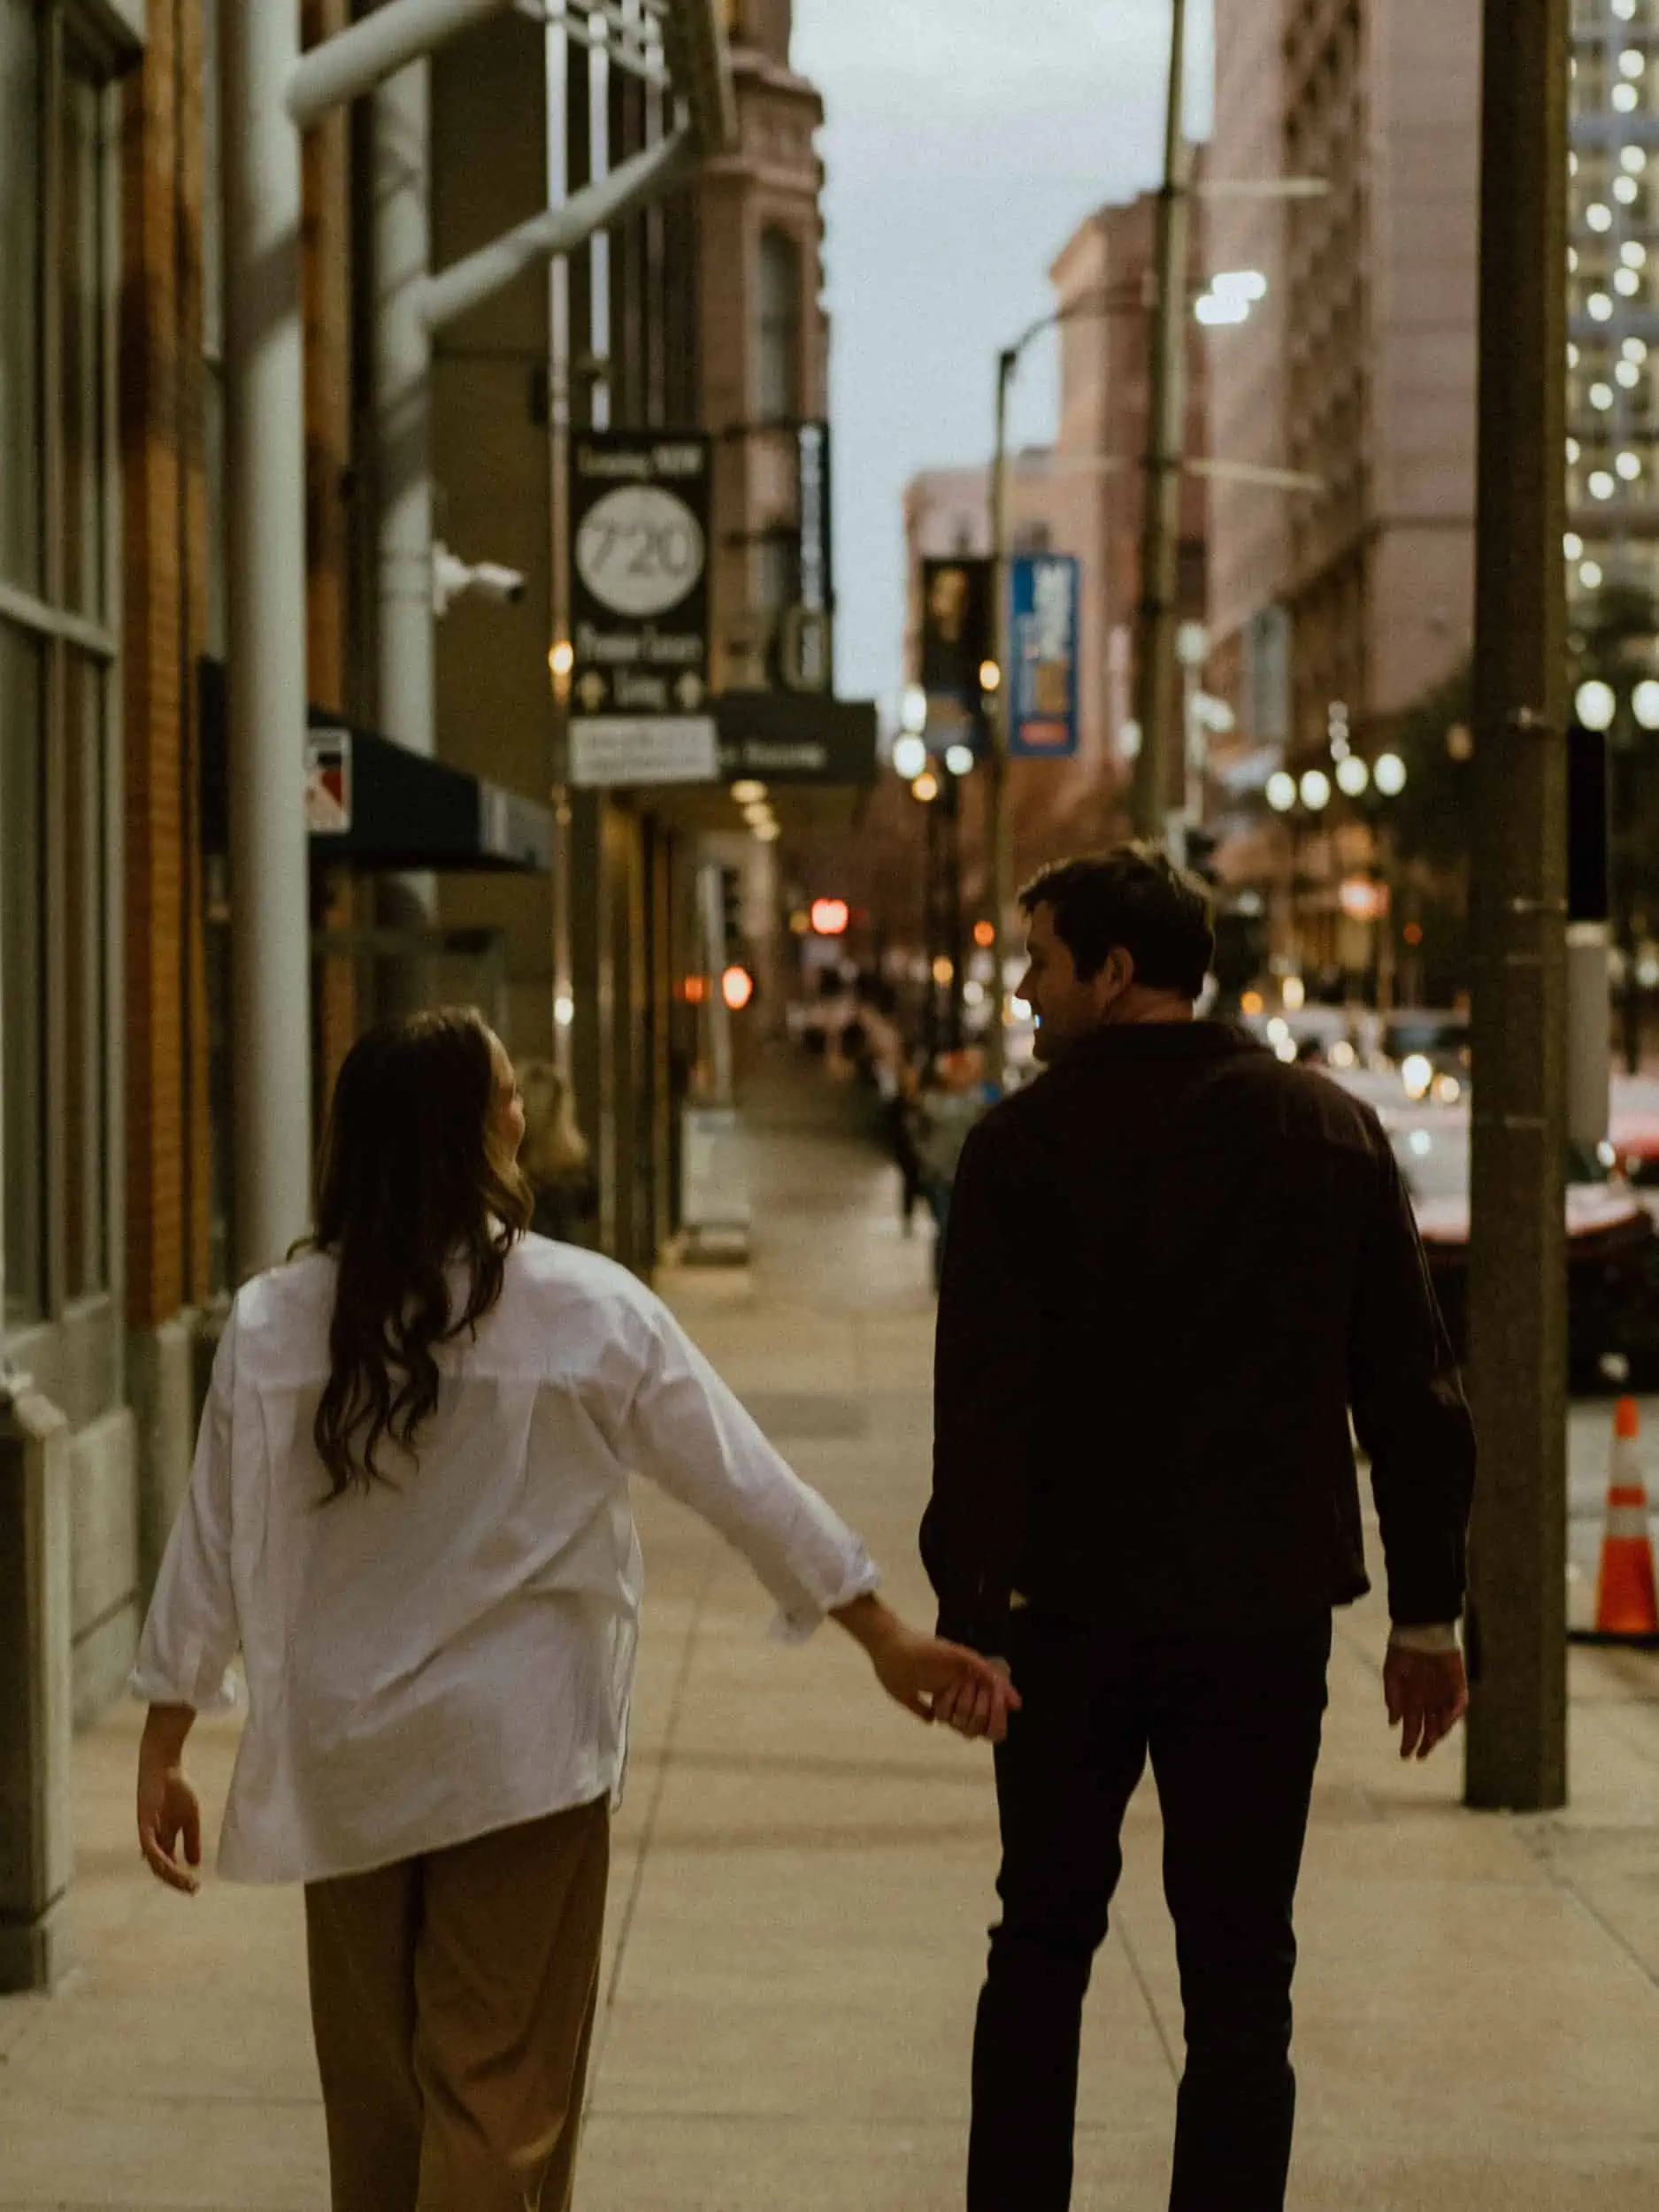 A couple walking down an urban street in St. Louis, Missouri, photographed with a romantic and moody style.